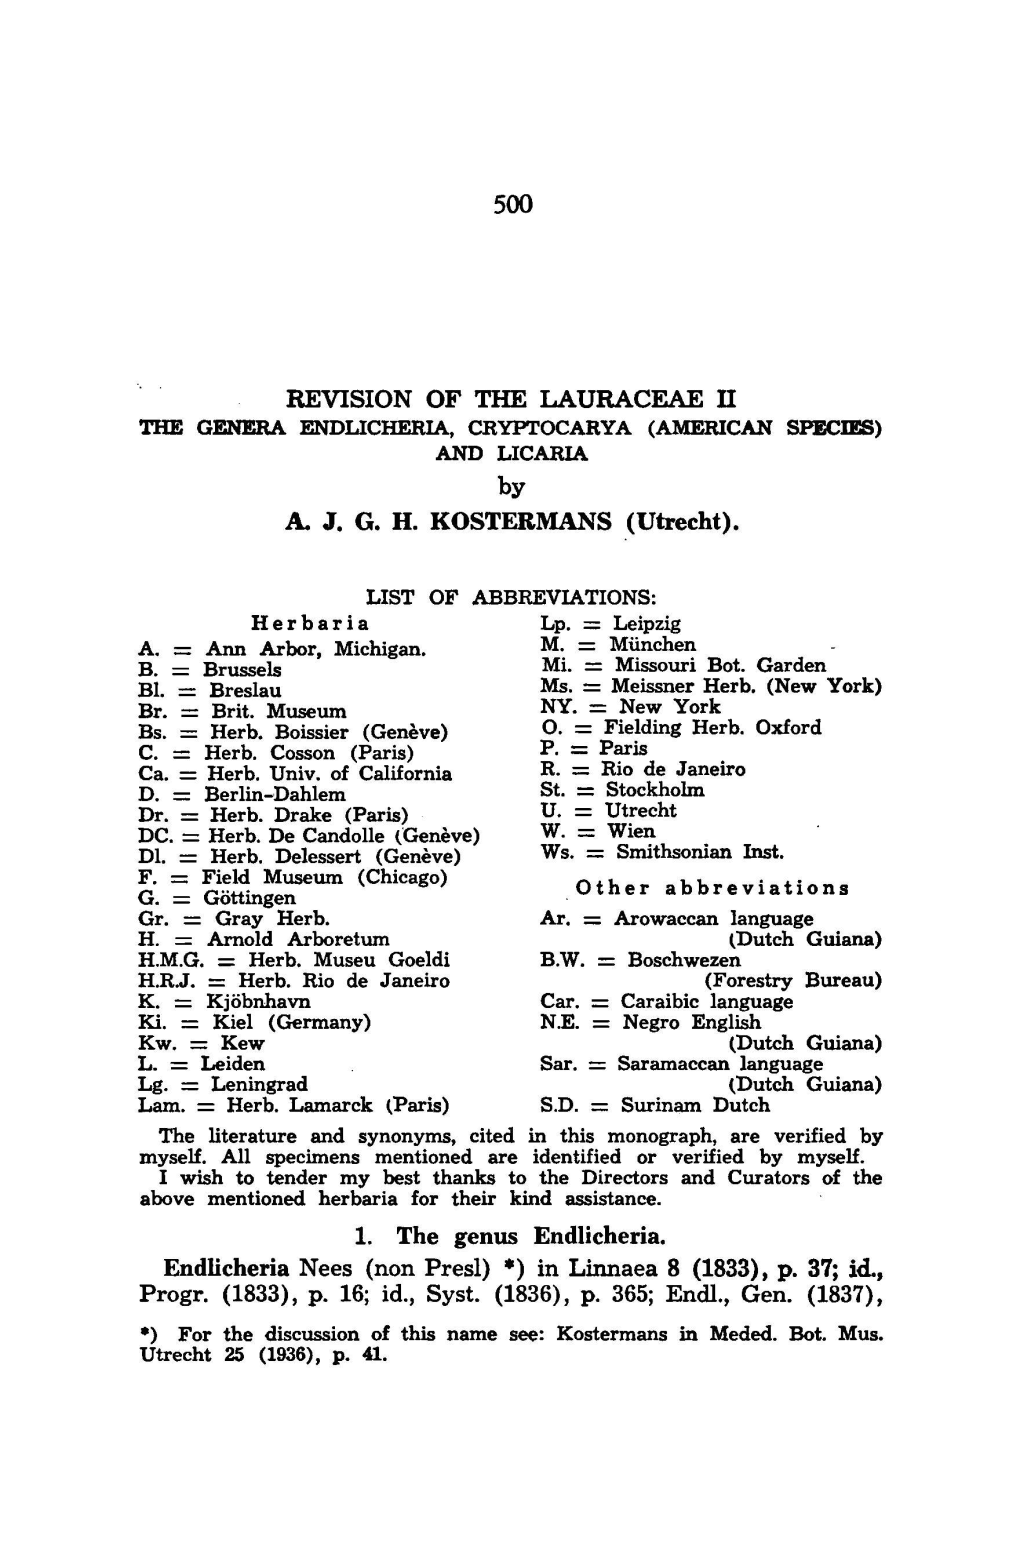 Revision of the Lauraceae II